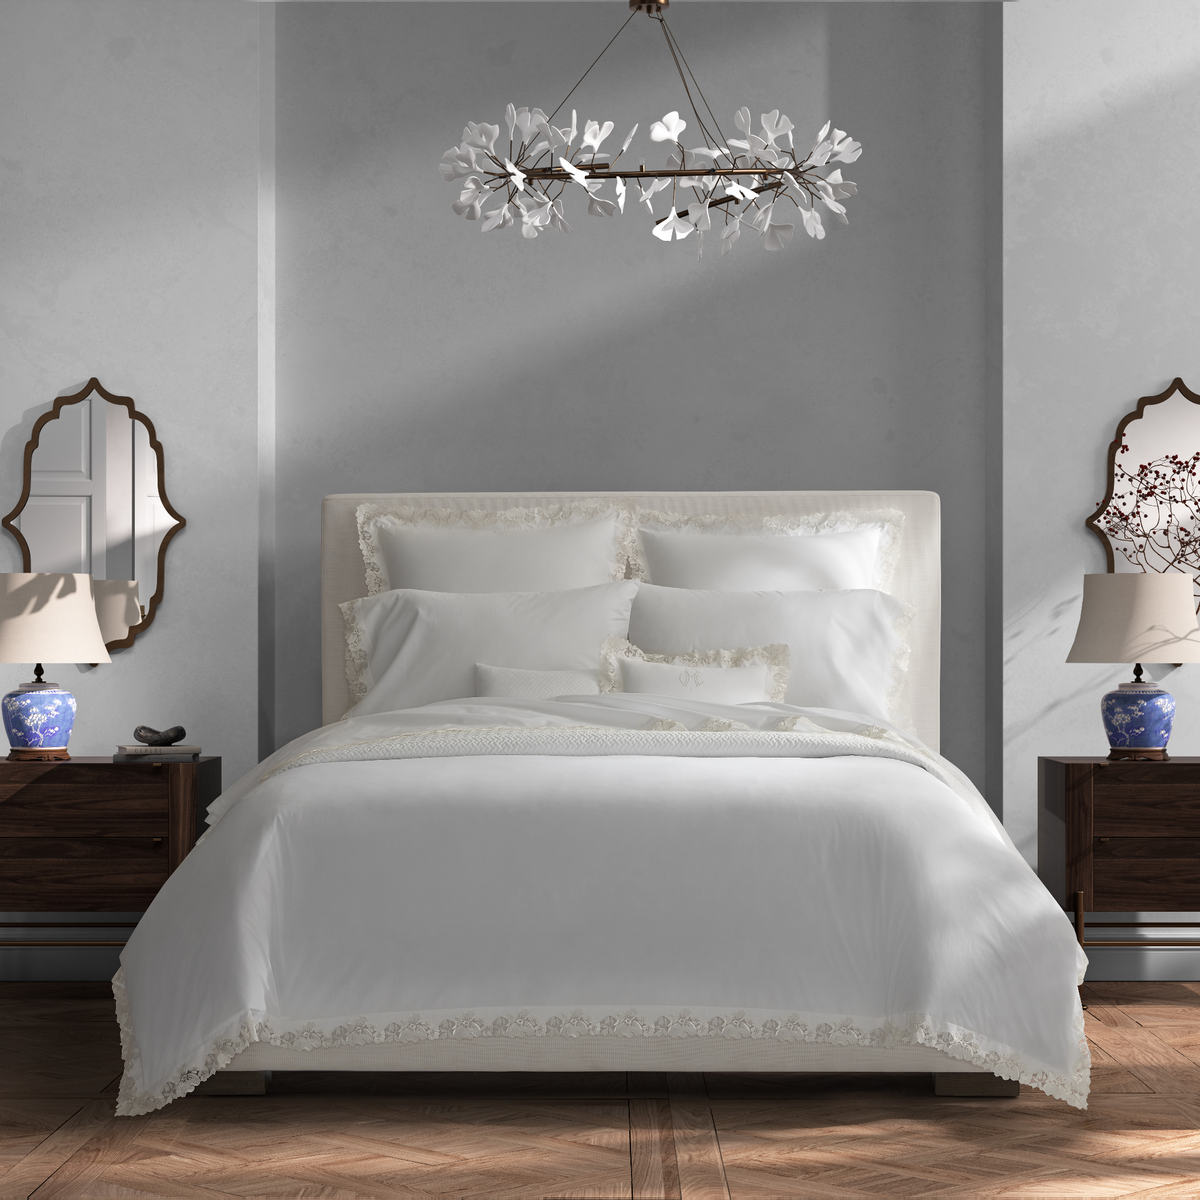 Full Bed with Matouk Virginia Bedding in White  Color Together with Basketweave Collection